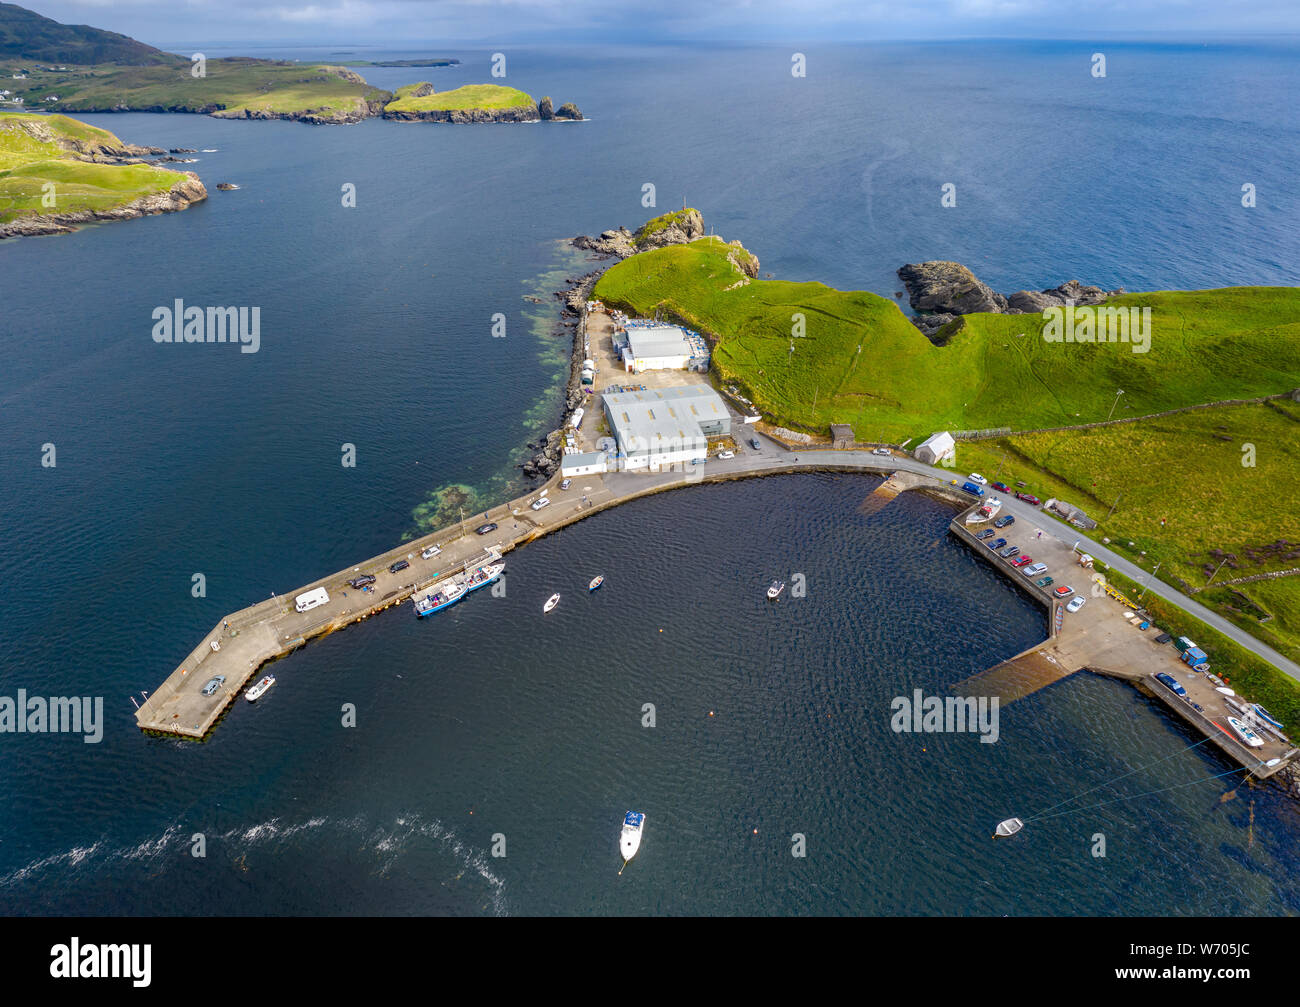 Aerial view of Teelin Bay in County Donegal on the Wild Atlantic Way in Ireland. Stock Photo